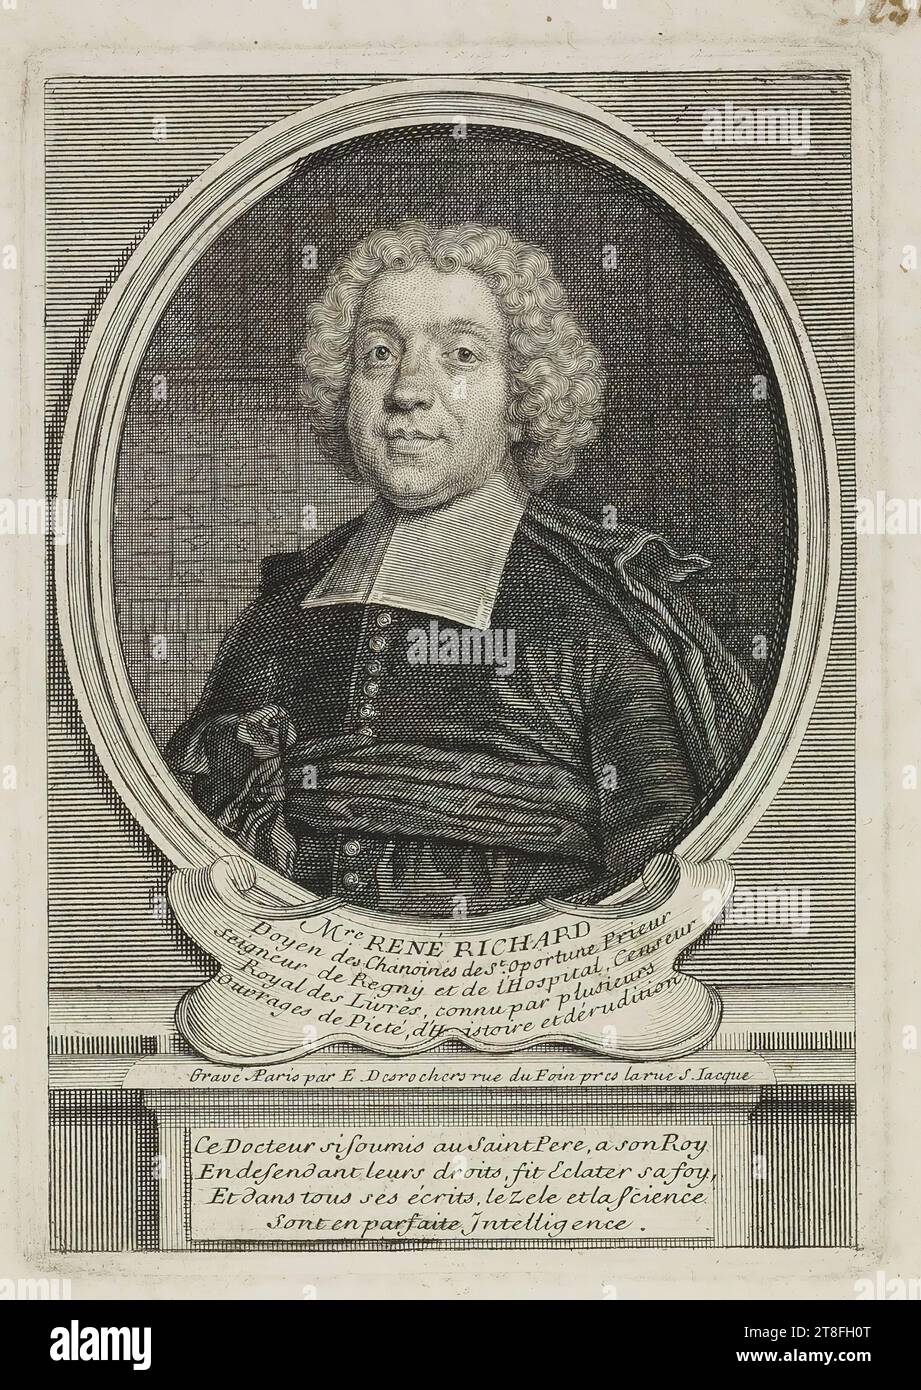 mr. RENÉ RICHARD, Dean of the Canons of St. Oportune Prior, Lord of Regny and of the Hospital, Censor, Royal of Books, known by many, Works of Piety, History and Learning. Engraved in Paris by E. Desrochers rue du Foin near rue S. Iacque. This Doctor so devoted to the Holy Father, to his King, By desiring their rights, made his faith explode, And in all his writings, Zeal and science, Are in perfect Intelligence Stock Photo